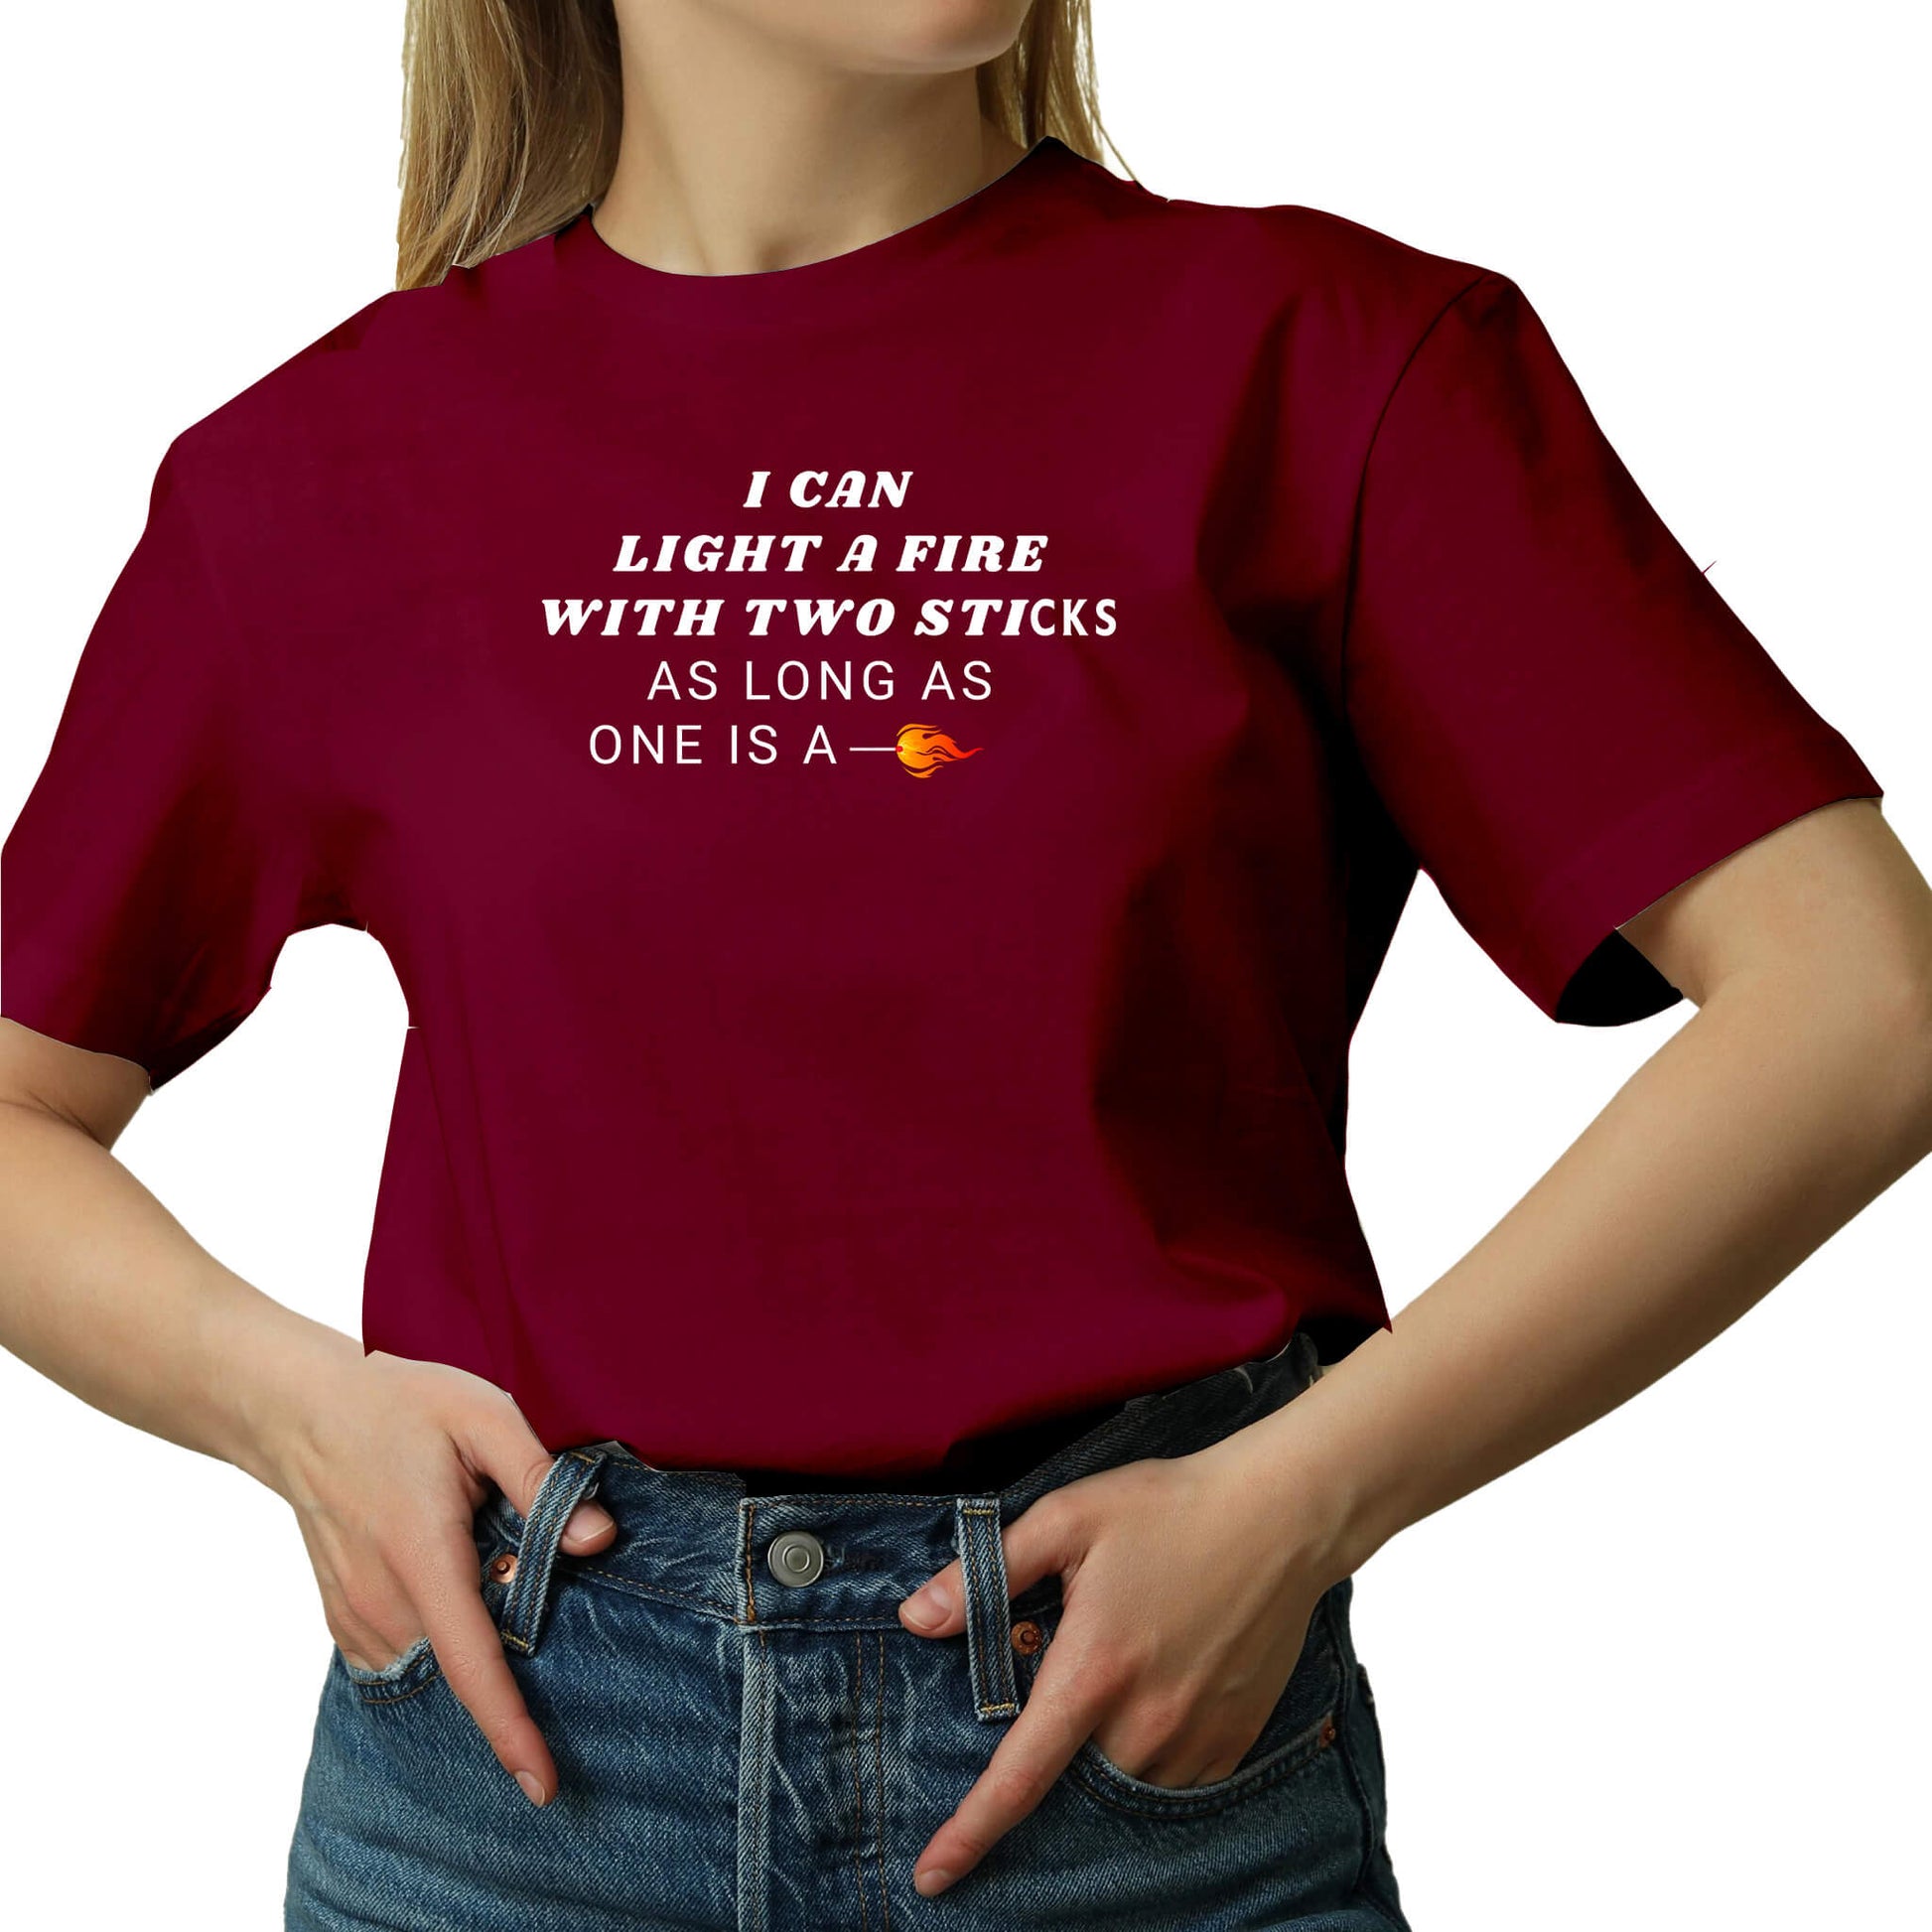 I can light a fire with two sticks t-shirt red female